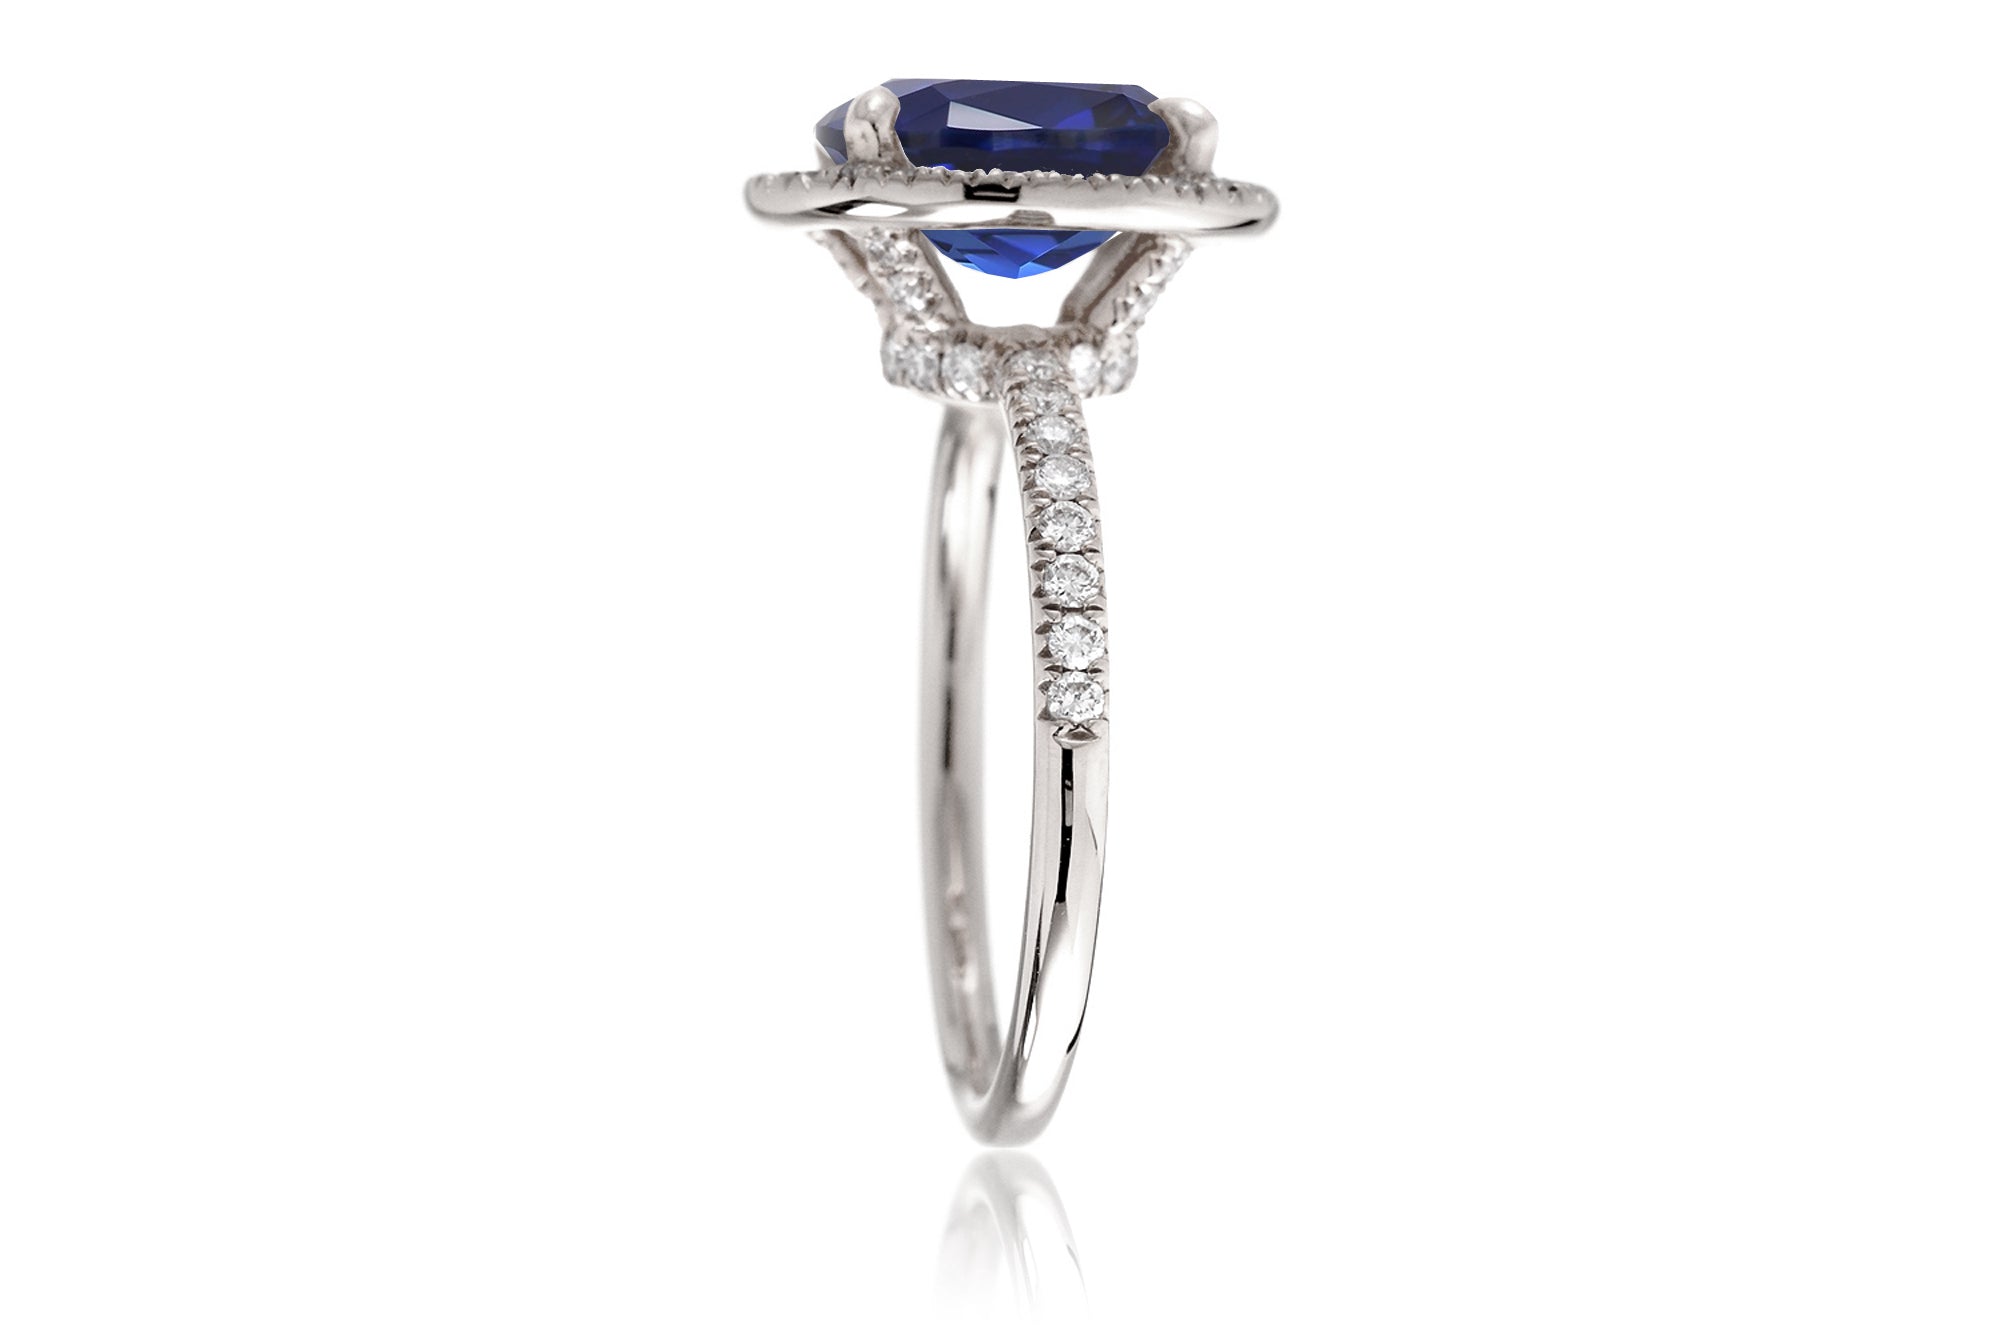 Oval sapphire diamond halo and band wedding rings white gold